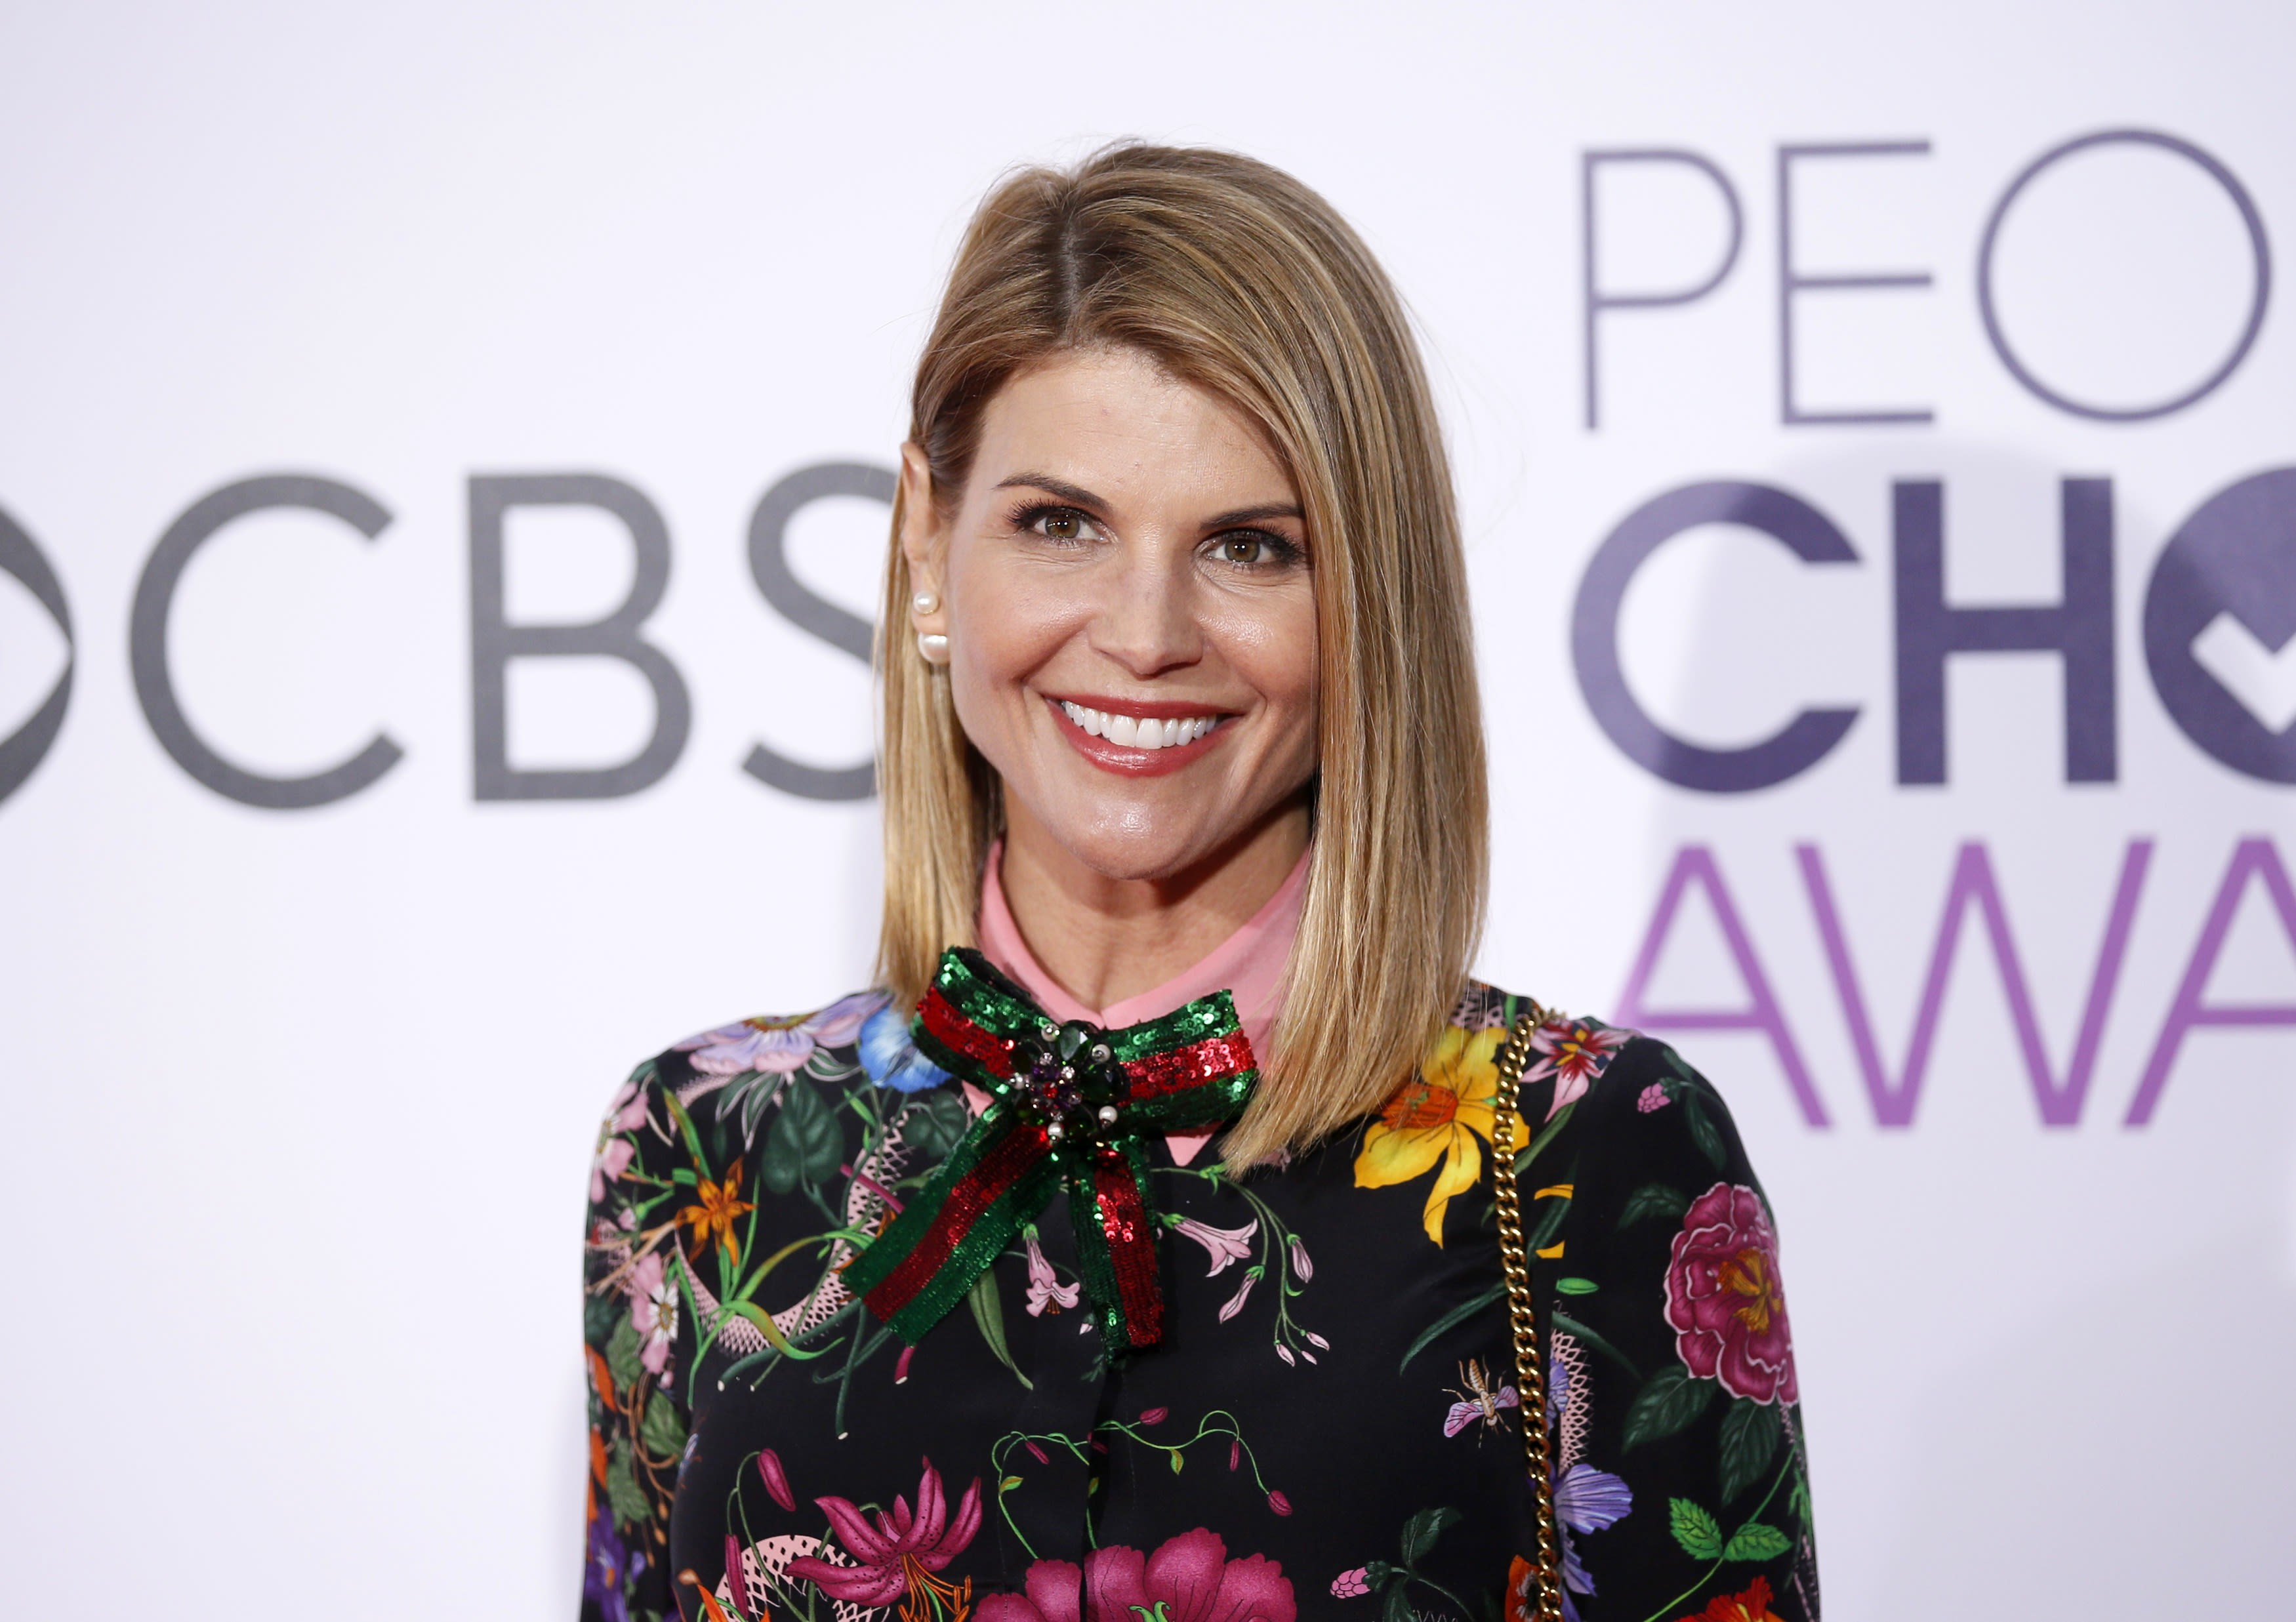 Lori Loughlin's social life is suffering as she prepares for college admissions scandal court hearing